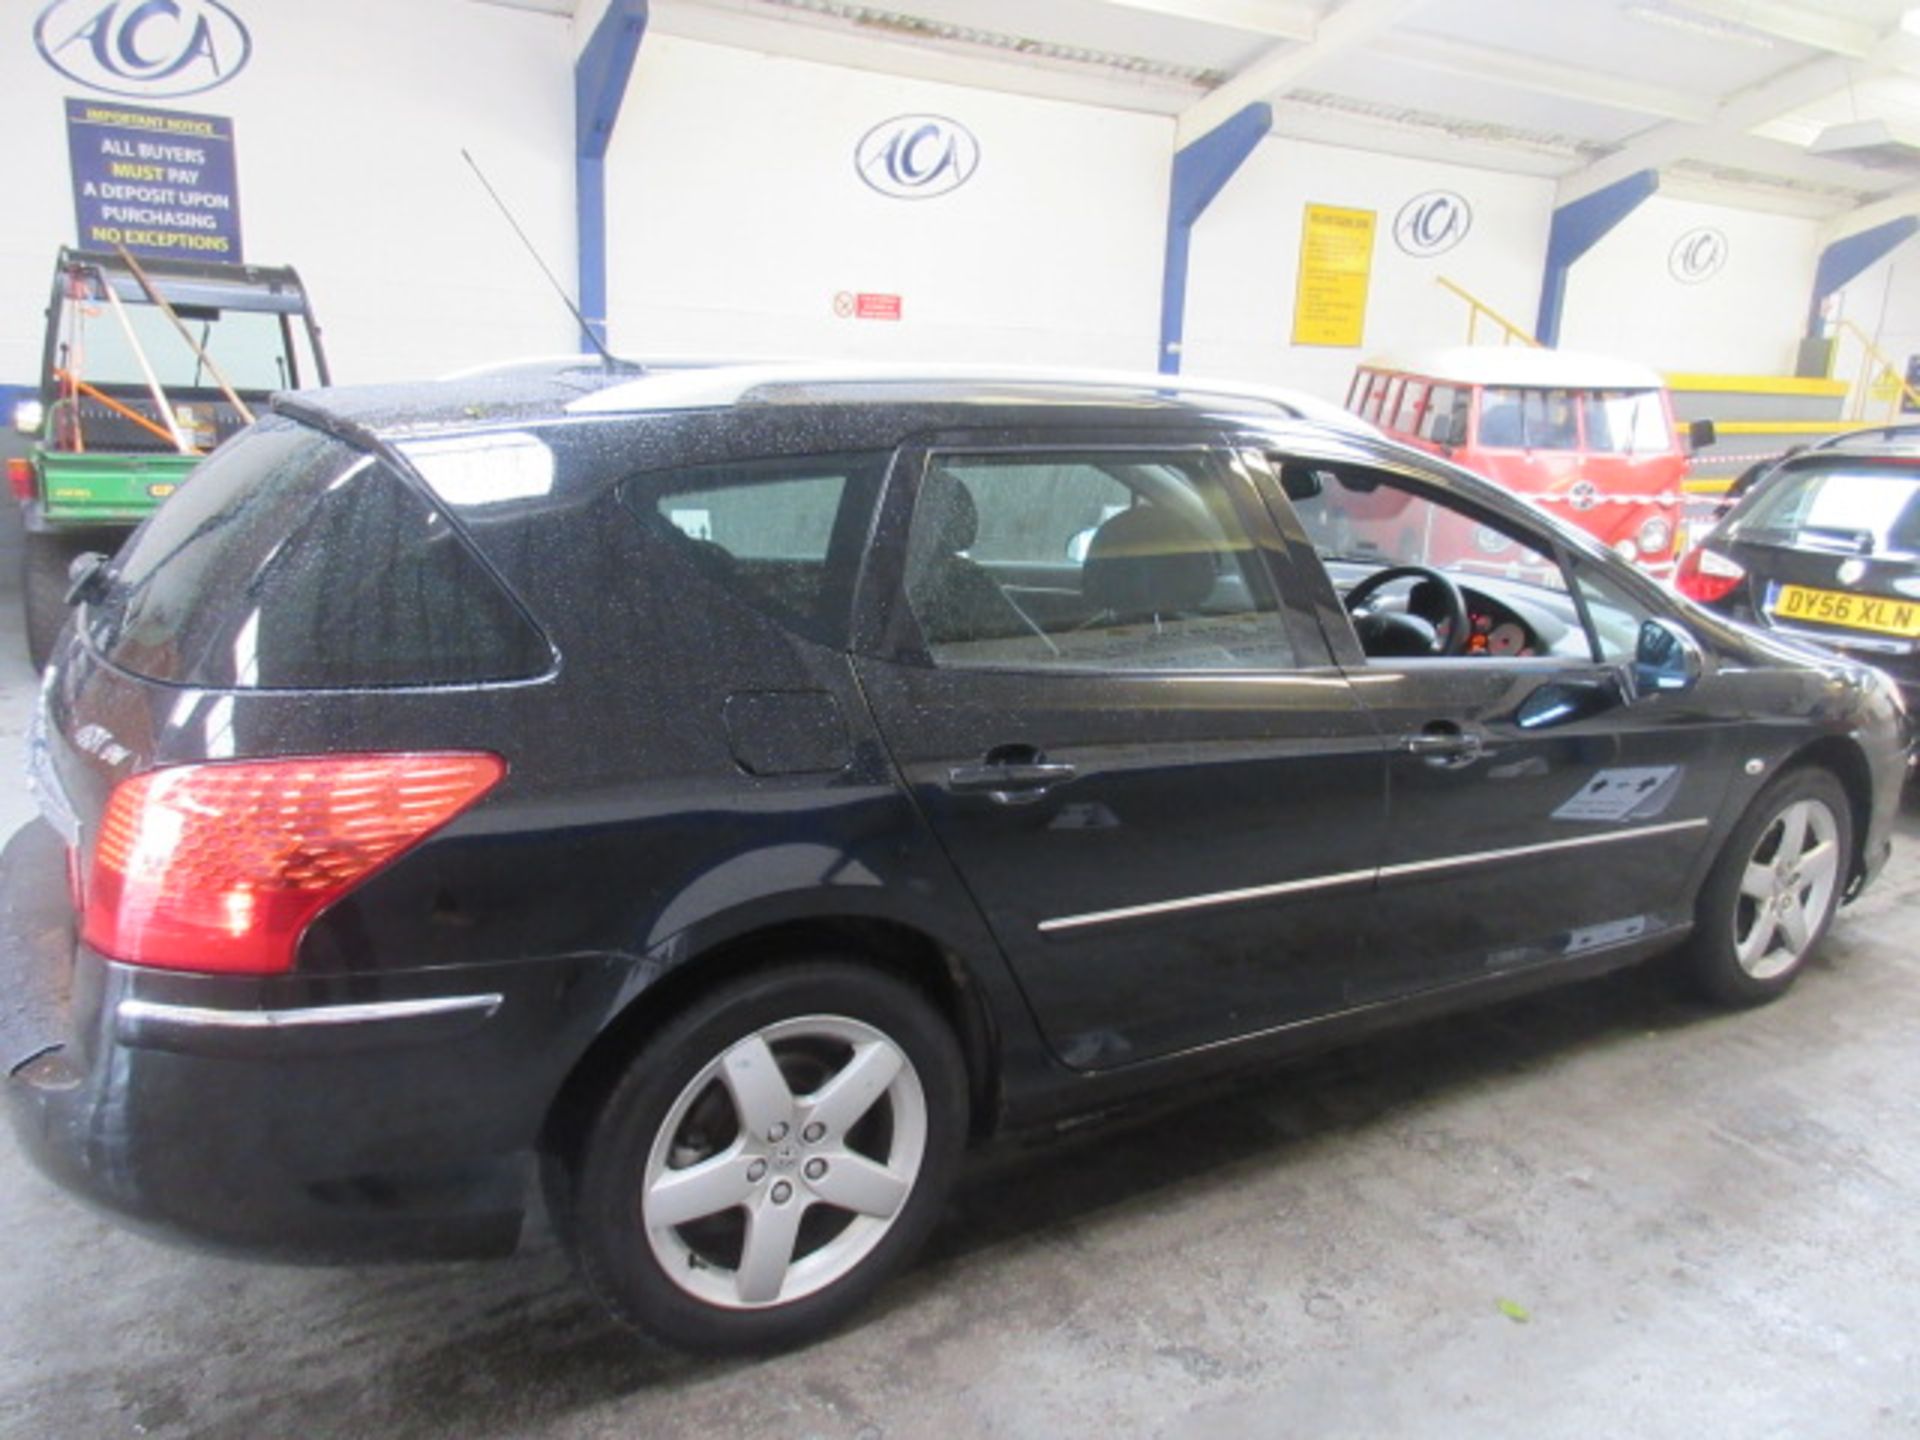 2010 Peugeot 407 Sport SW HDI 163 - Image 3 of 11